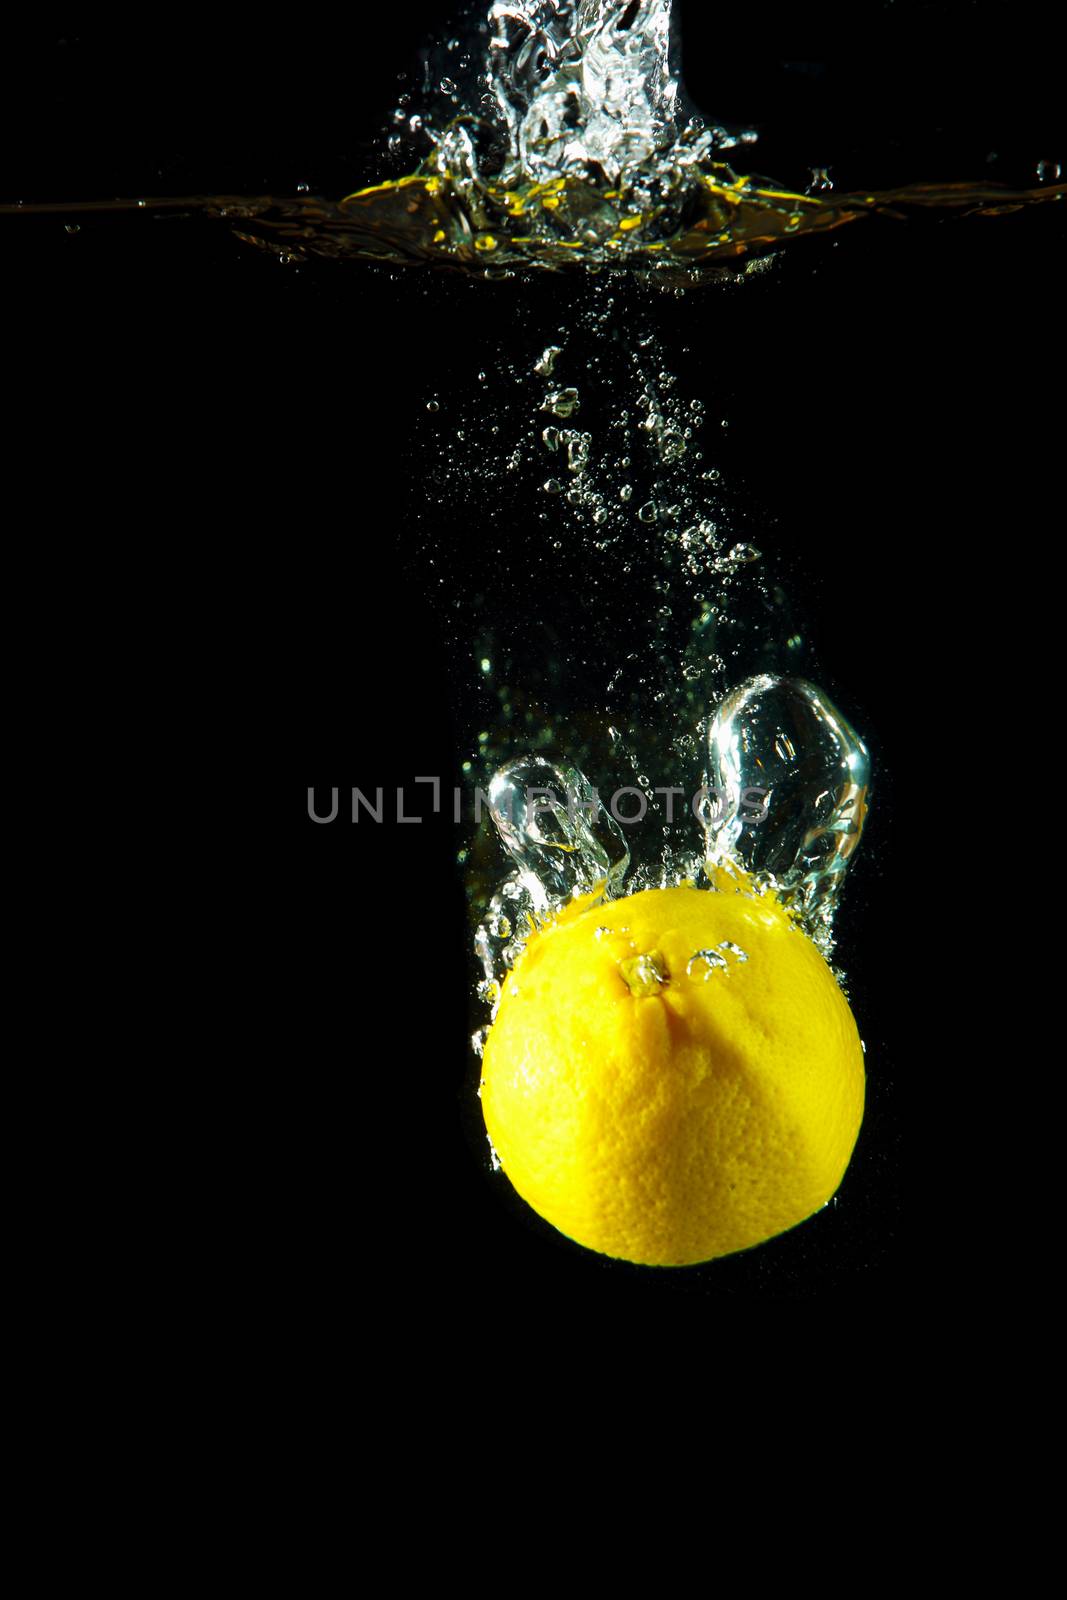 Bright and juicy lemon under water. Fresh and healthy meal